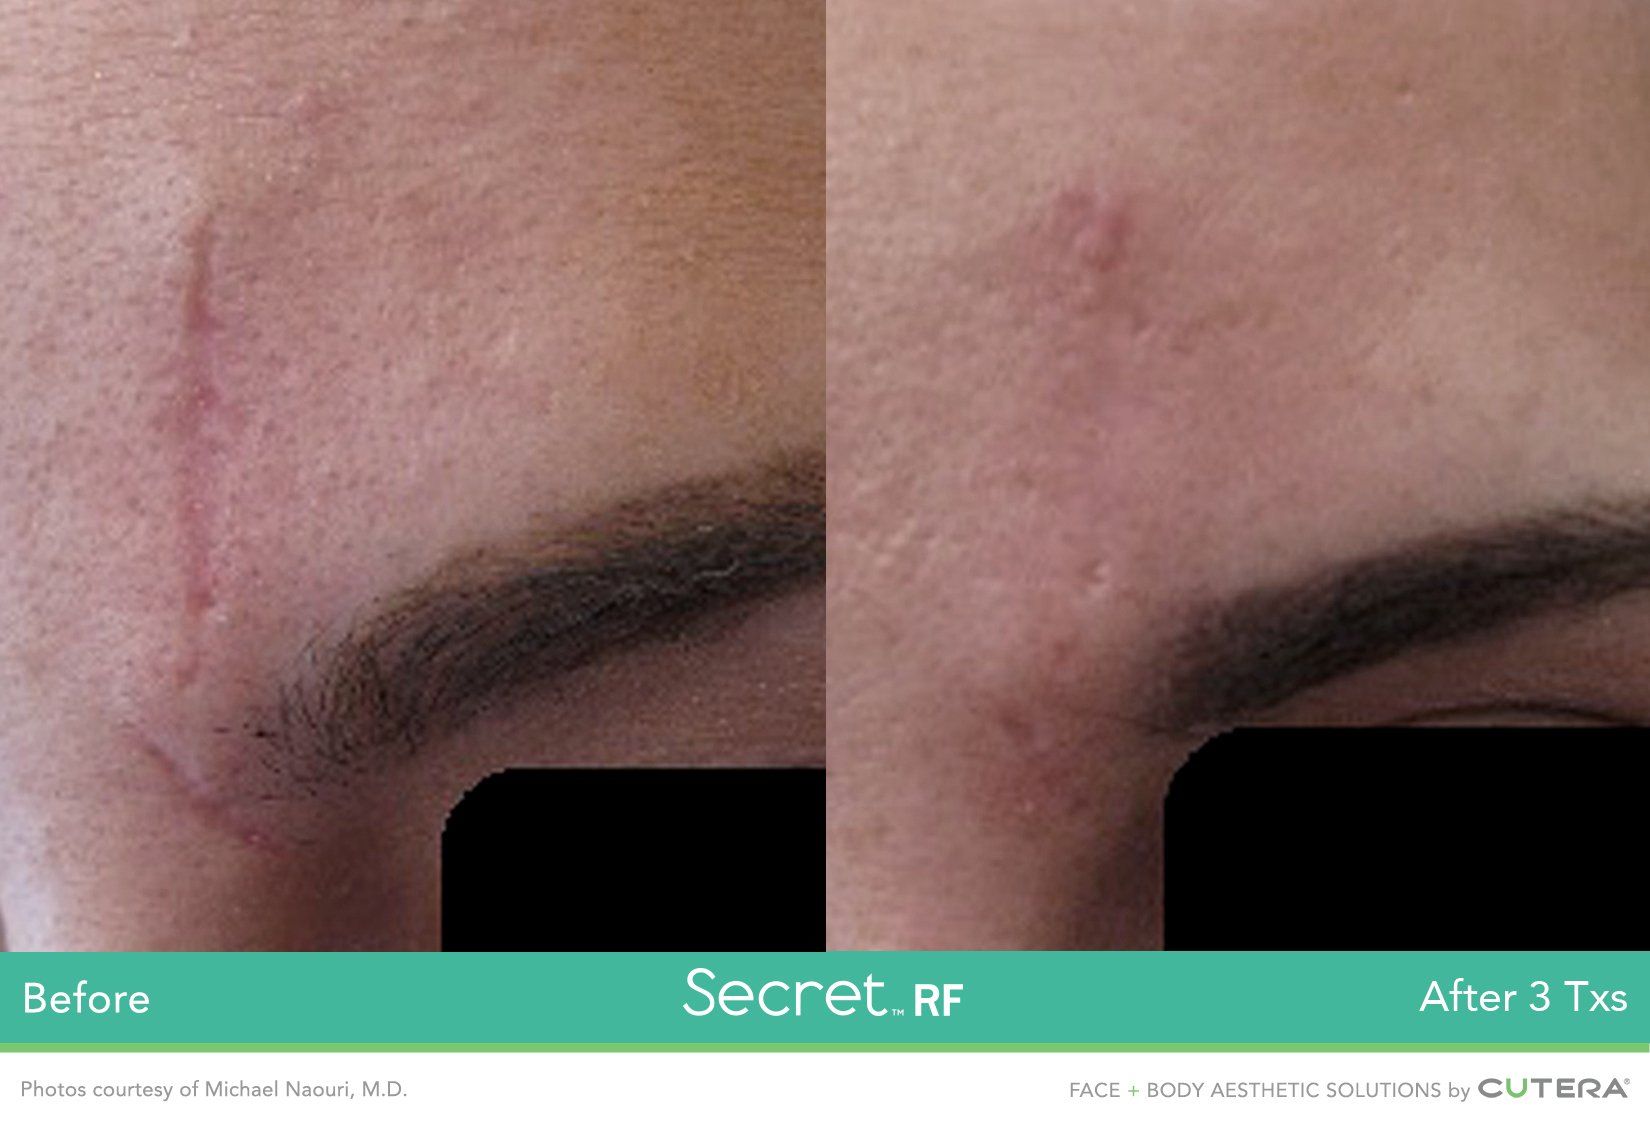 A before and after photo of a woman 's forehead with a scar.